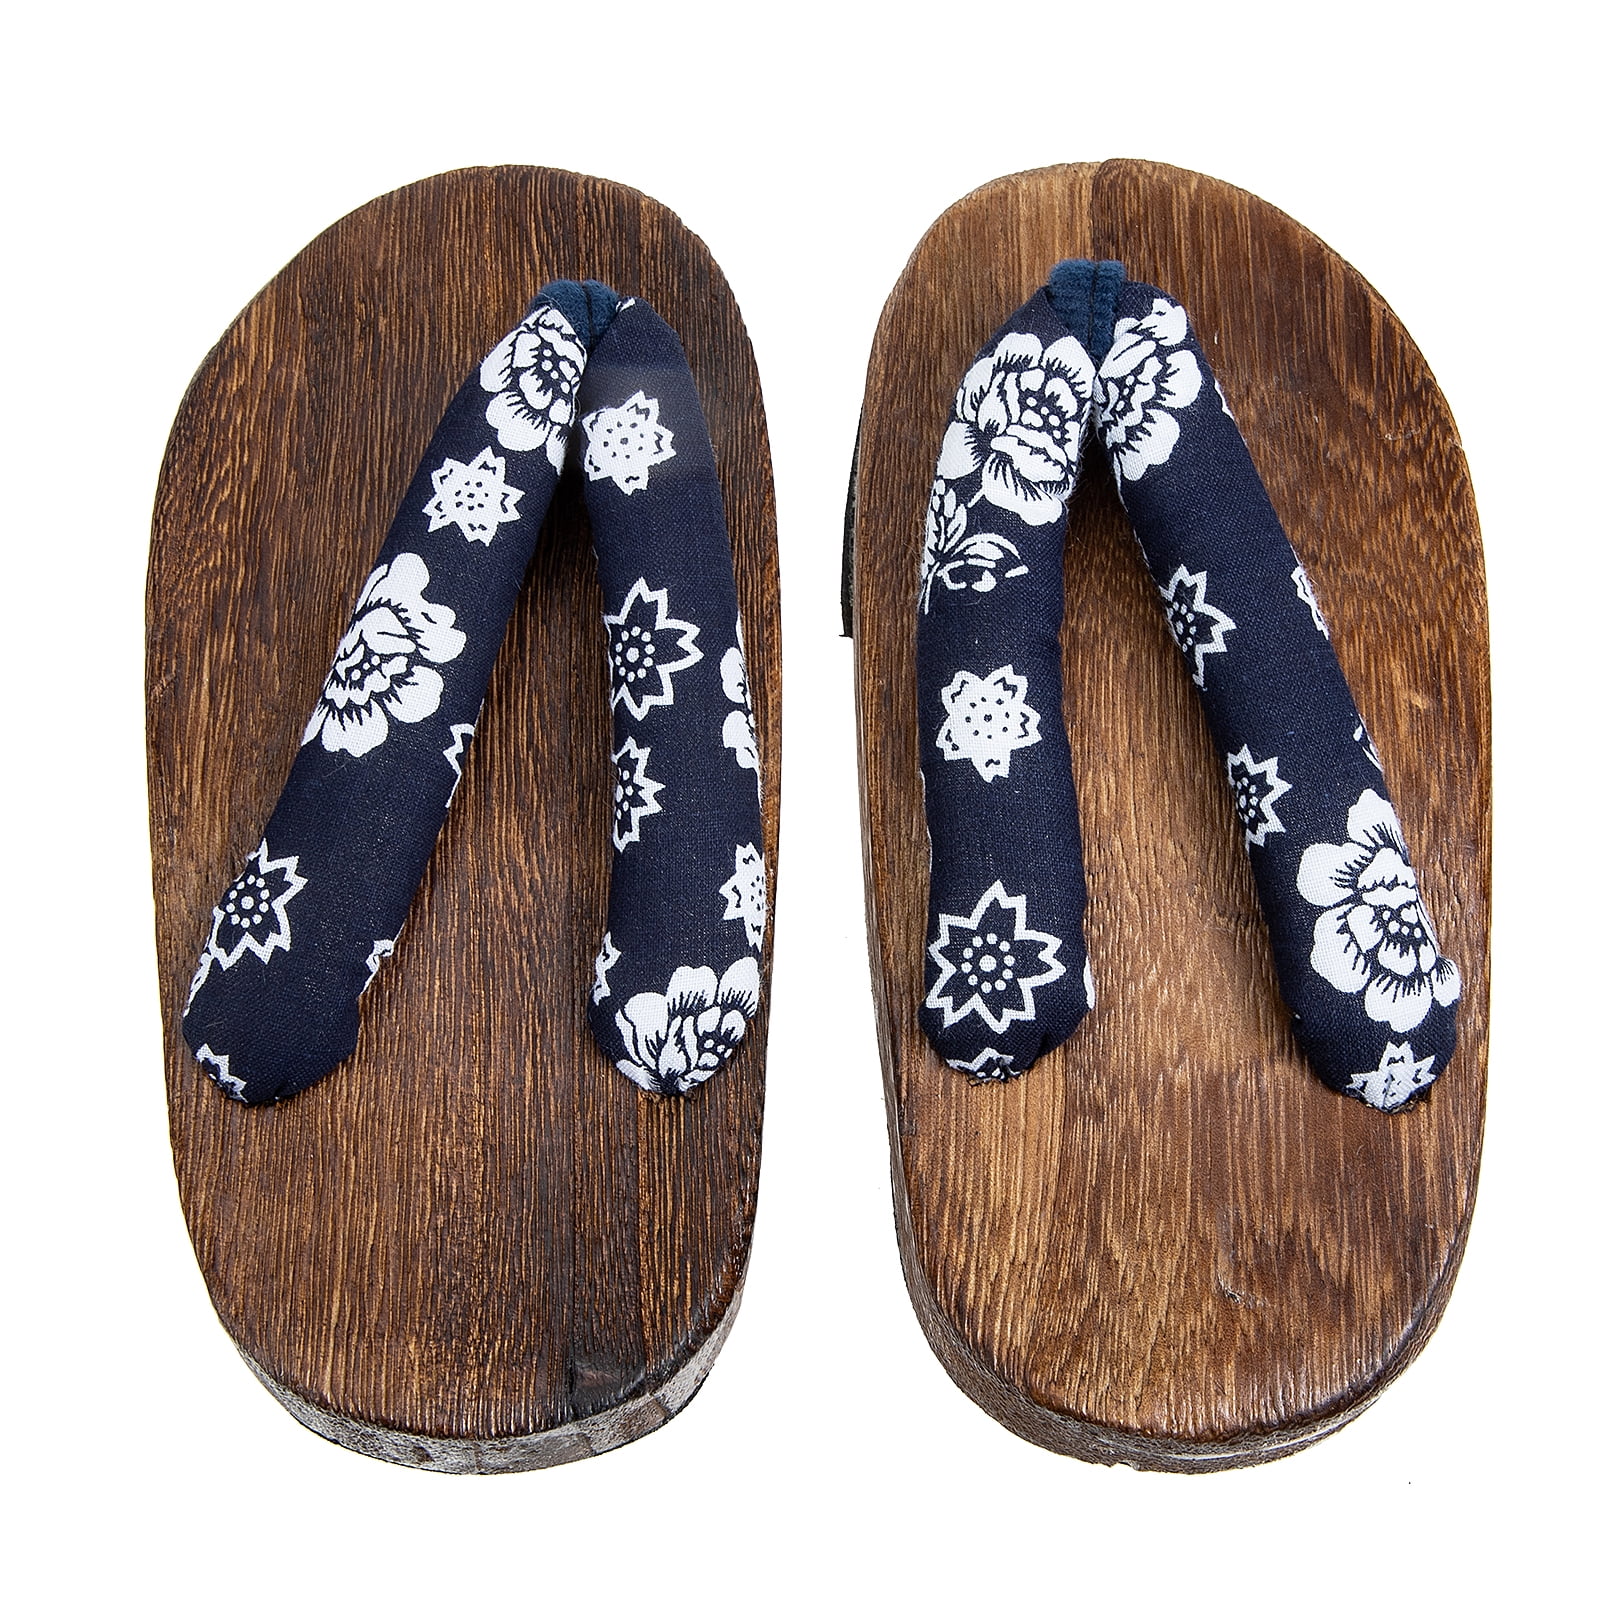 Buy Wooden Slippers Online In India - Etsy India-sgquangbinhtourist.com.vn